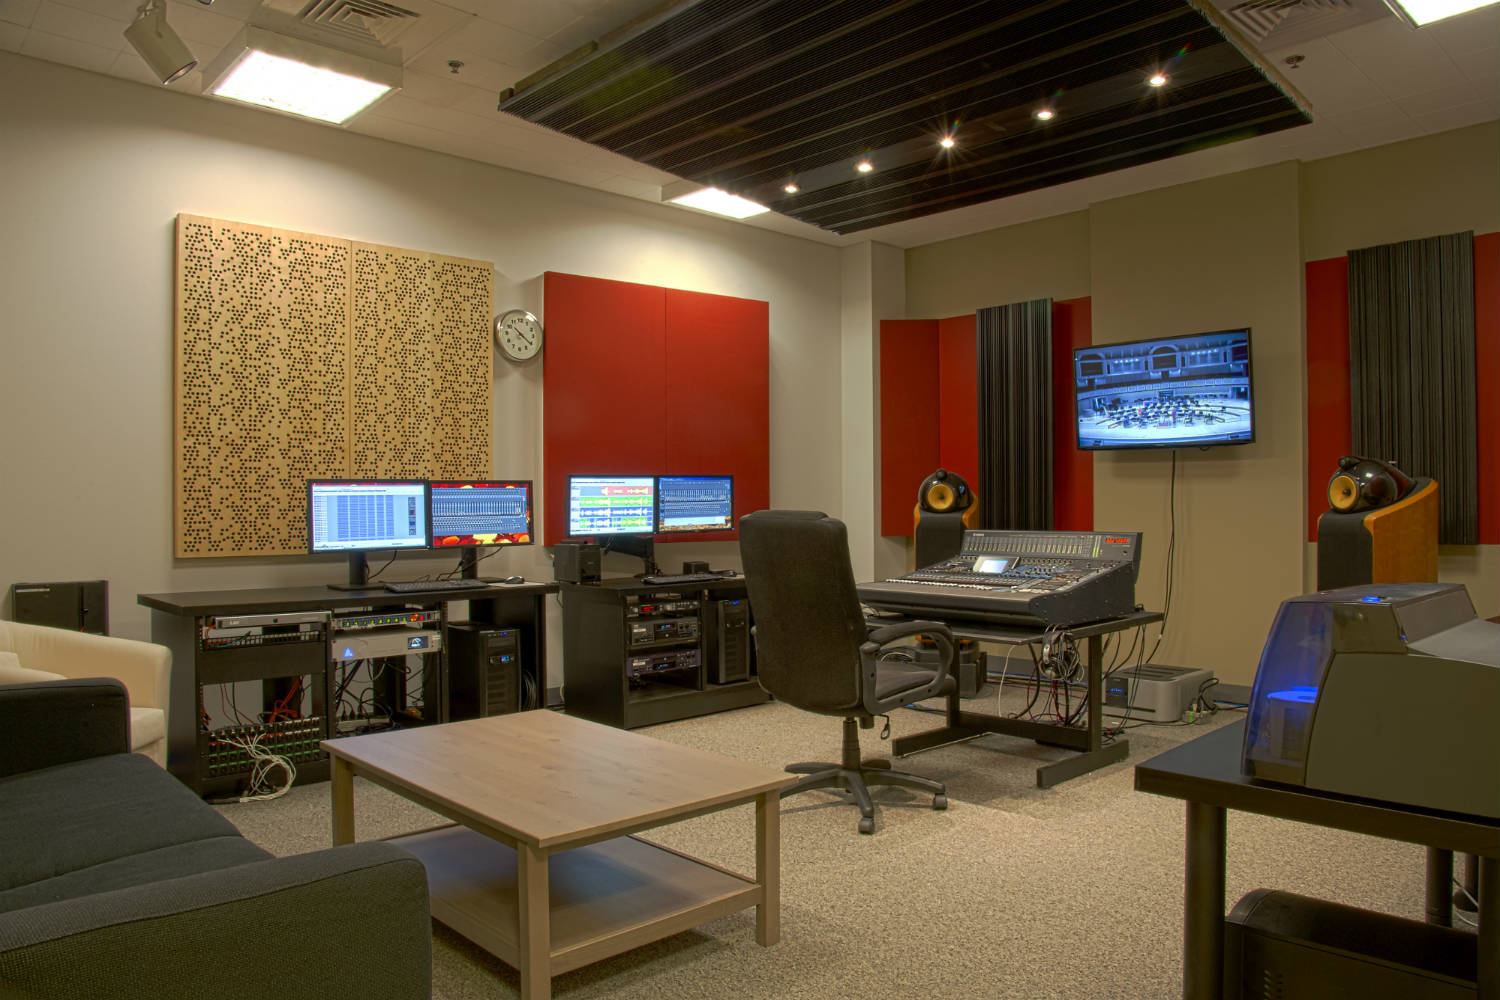 Chicago Symphony Orchestra Control Room - WSDG